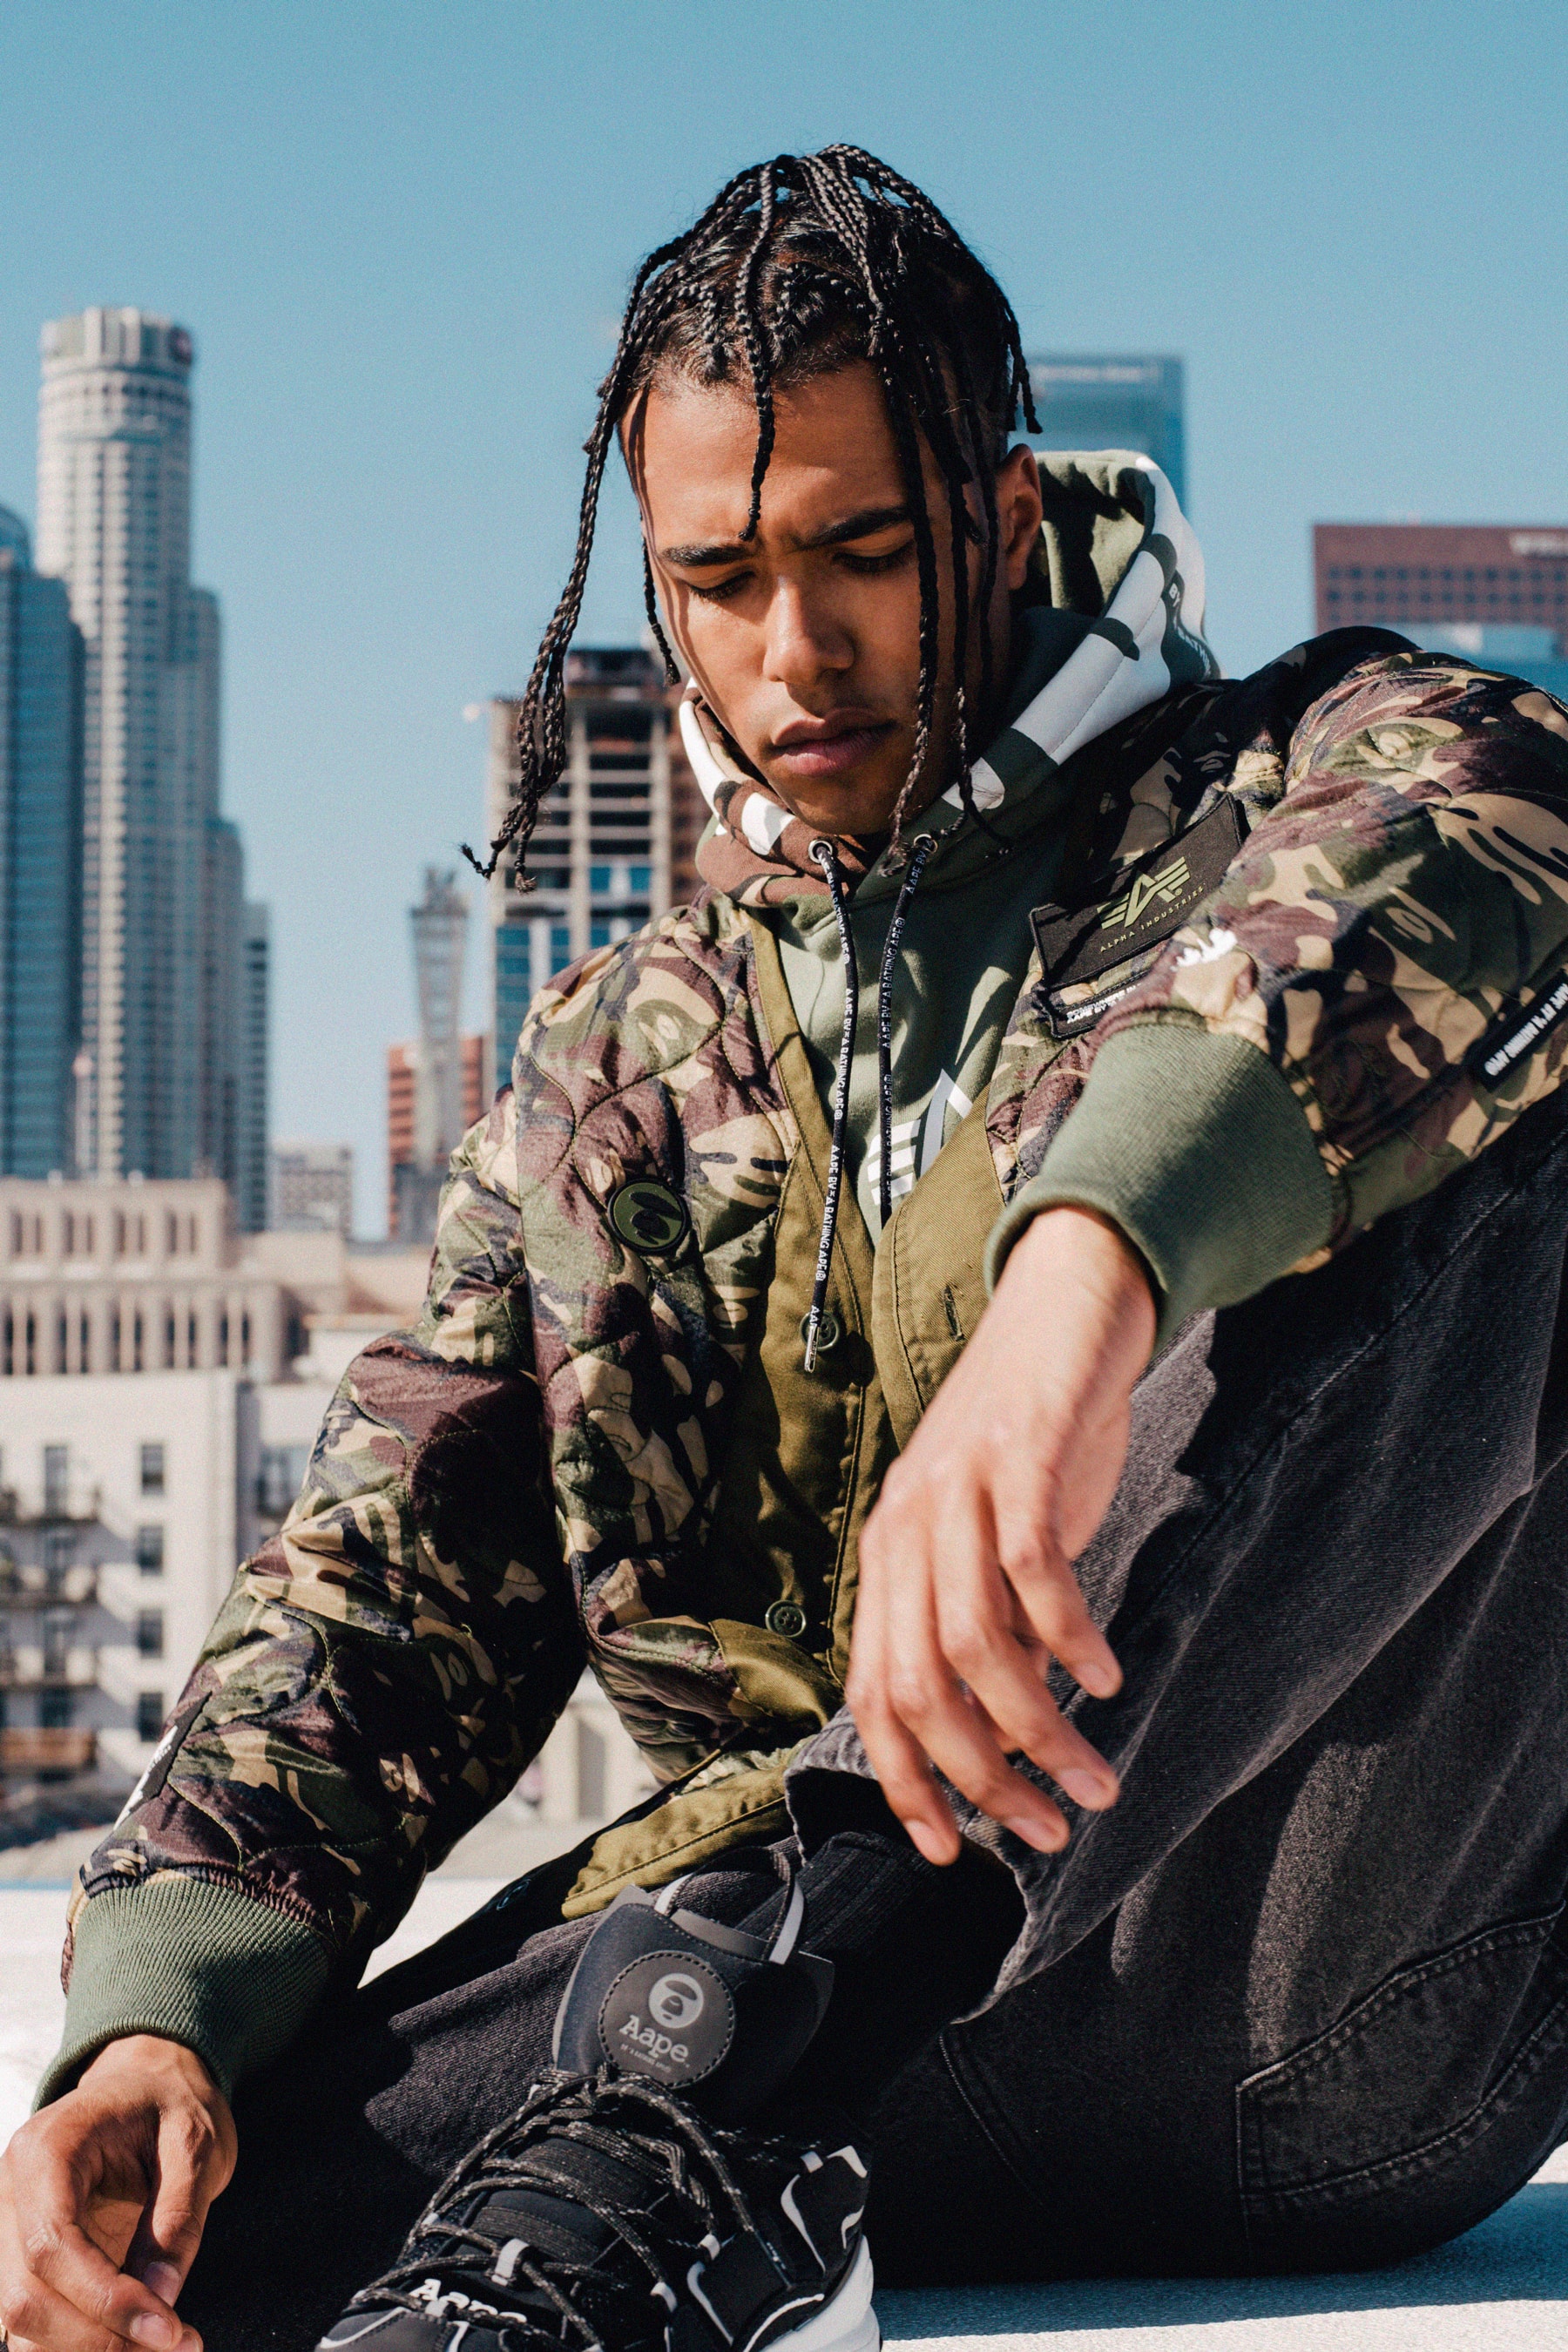 AAPE x Alpha Industries Fall/Winter 2019 Collection lookbooks outerwear jackets collaborations